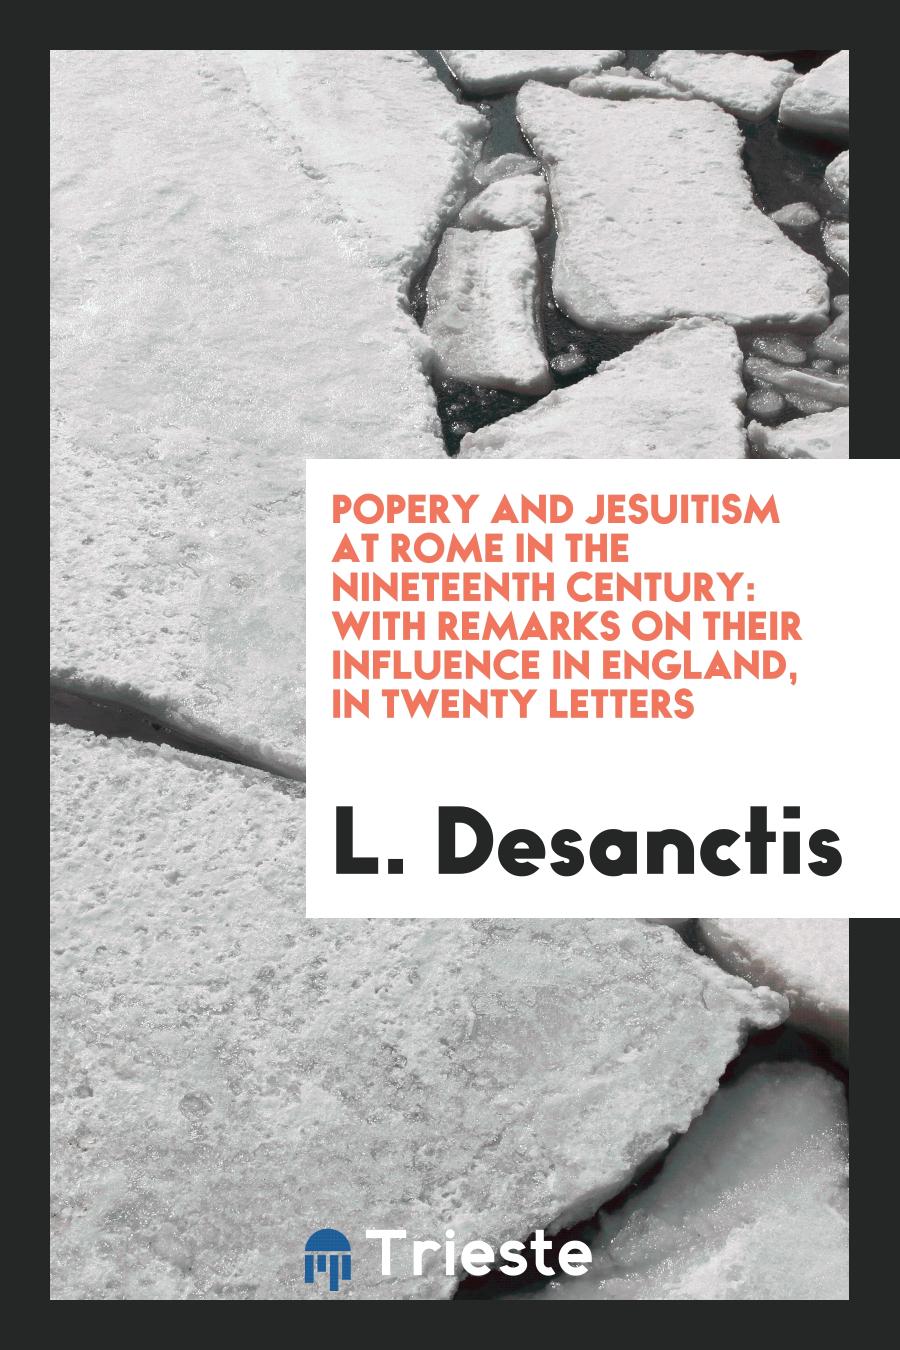 Popery and Jesuitism at Rome in the Nineteenth Century: With Remarks on Their Influence in England, in Twenty Letters